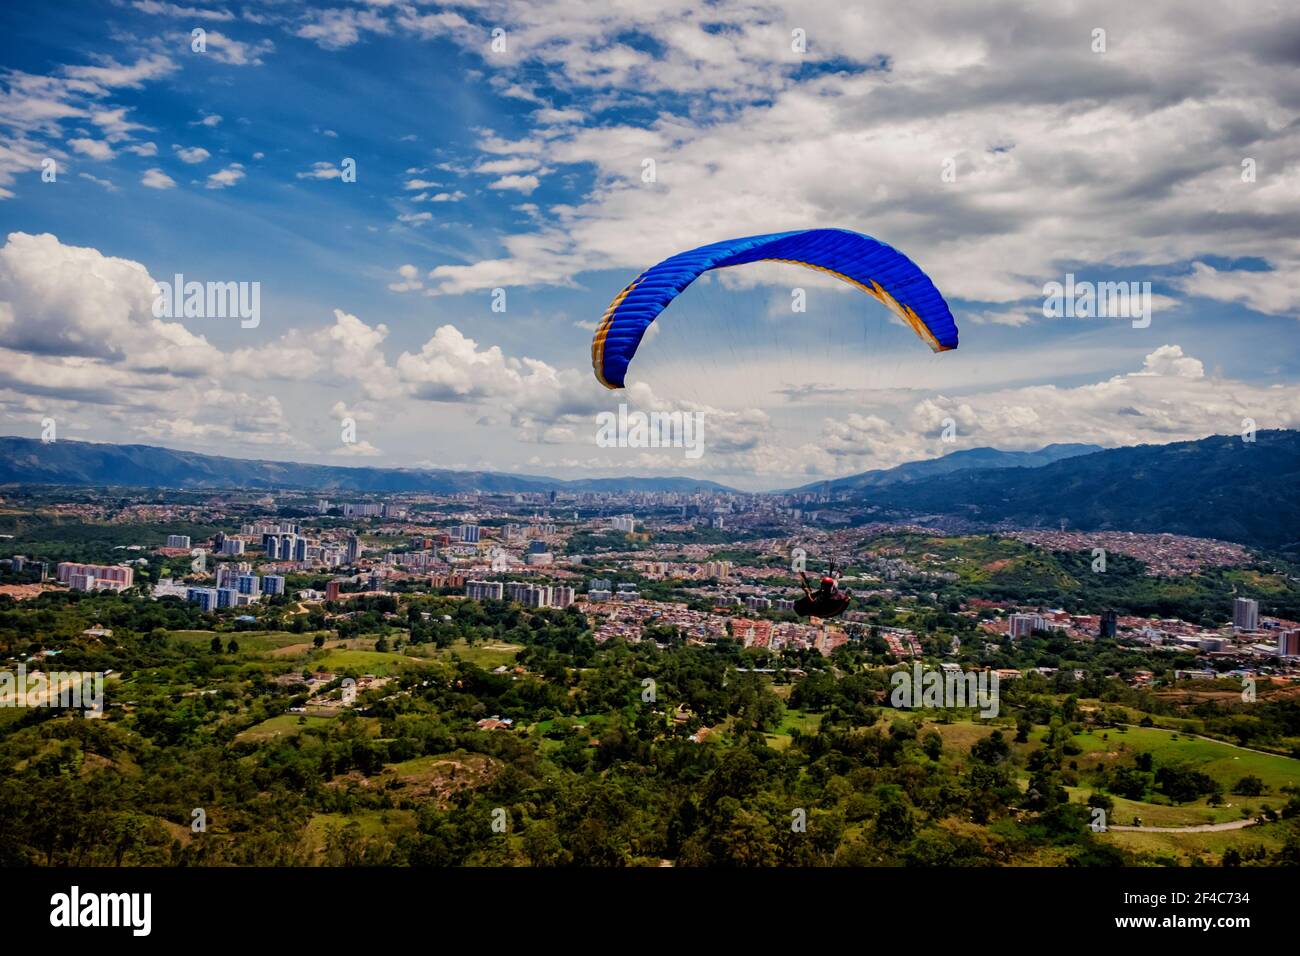 A paragllider flies over Bucaramanga, Colombia. Bucaramanga is a favorite destination for adventure sports enthusiasts.. Stock Photo